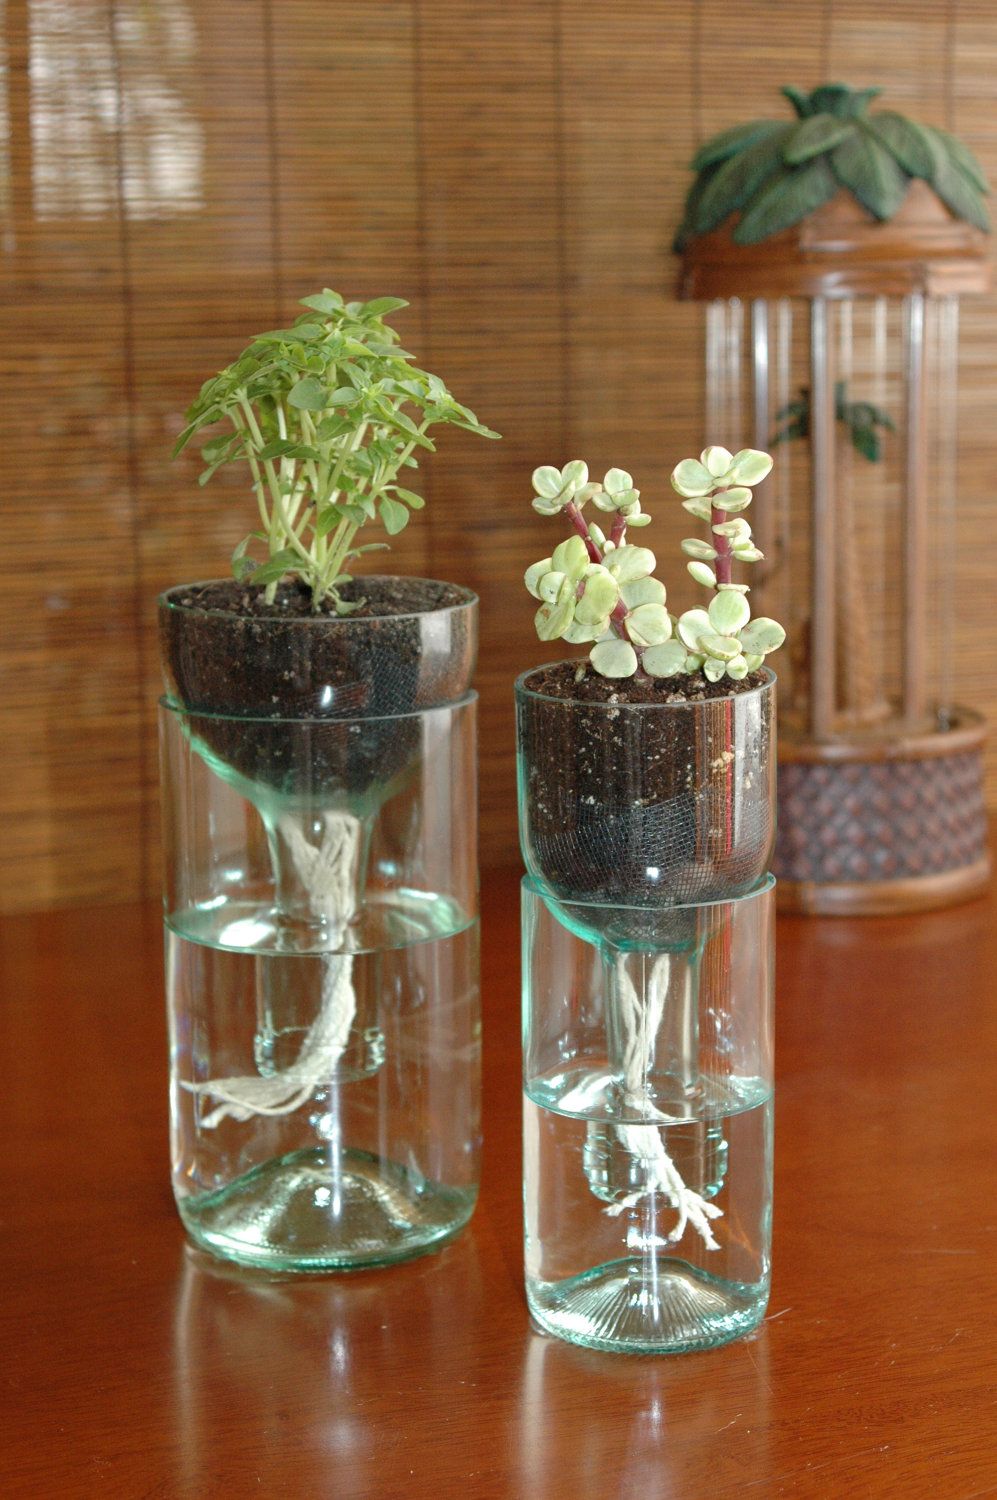 Step 1: Materials -   Self-watering planter made from recycled bottles…clever clever.